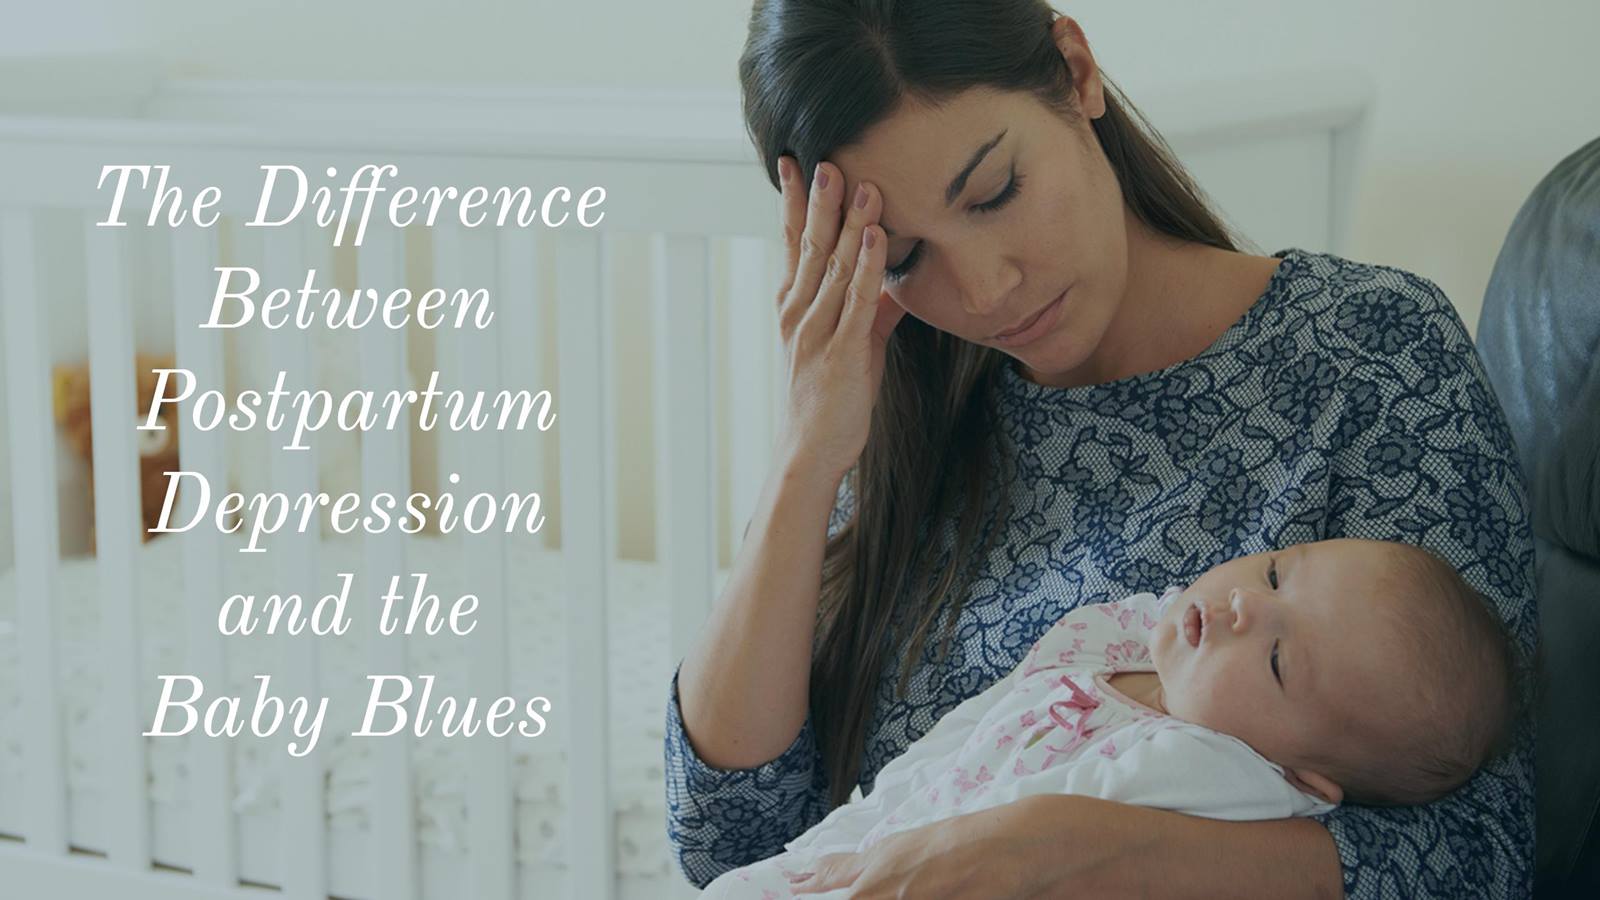 How Is Postpartum Depression Different From “Baby-blues”?